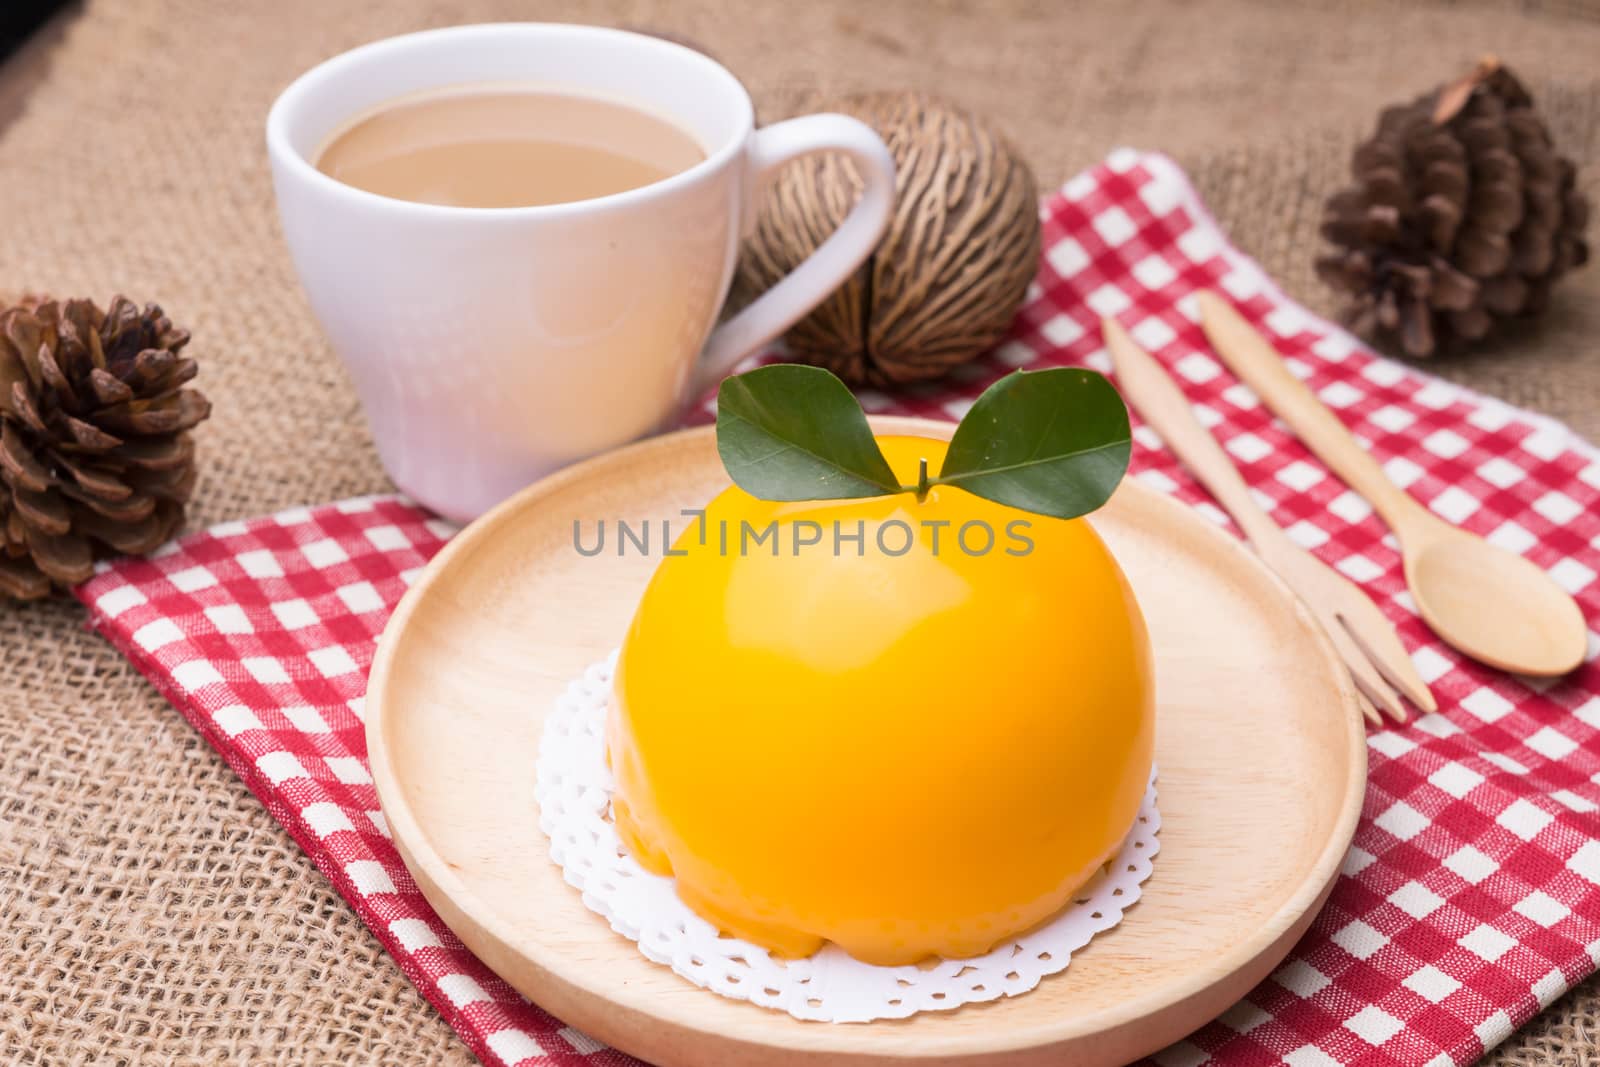 Orange cake with orange form and coffee cup